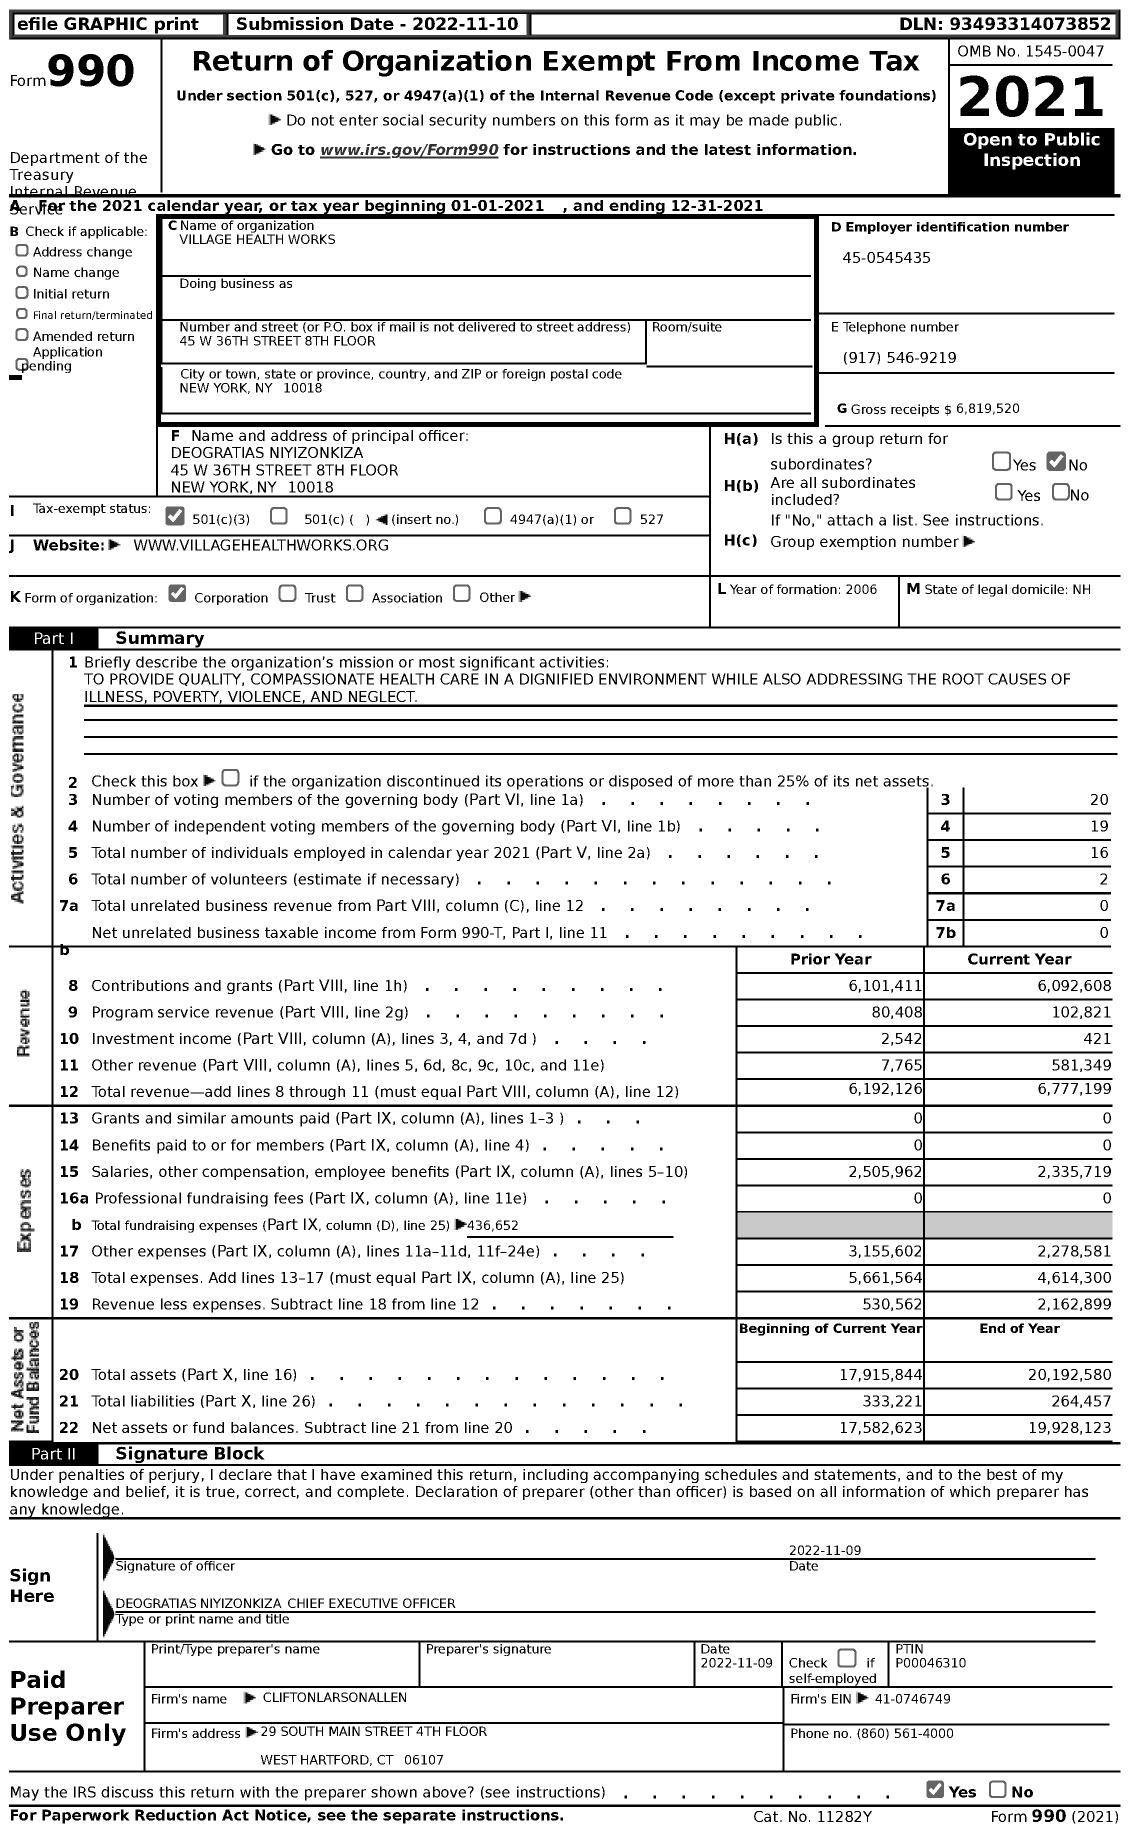 Image of first page of 2021 Form 990 for Village Health Works (VHW)